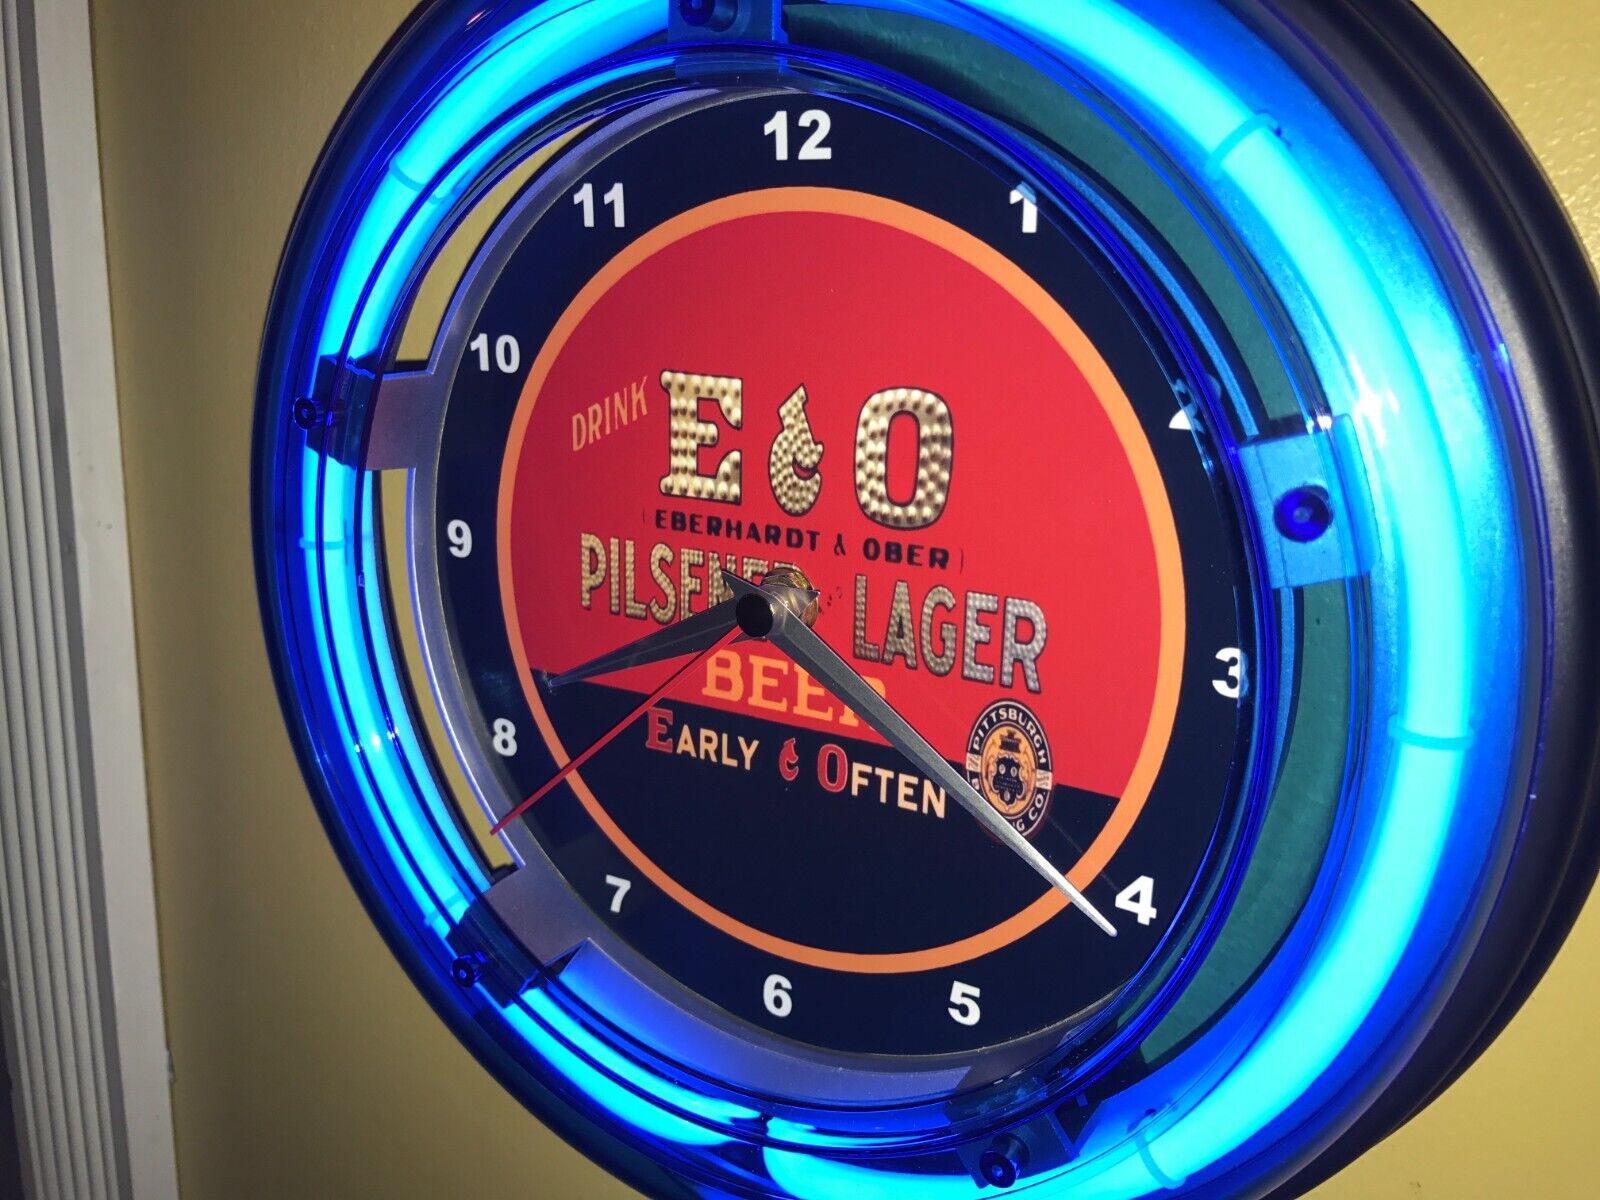 E&O Early and Often Beer Bar Man Cave Neon Wall Clock Advertising Sign